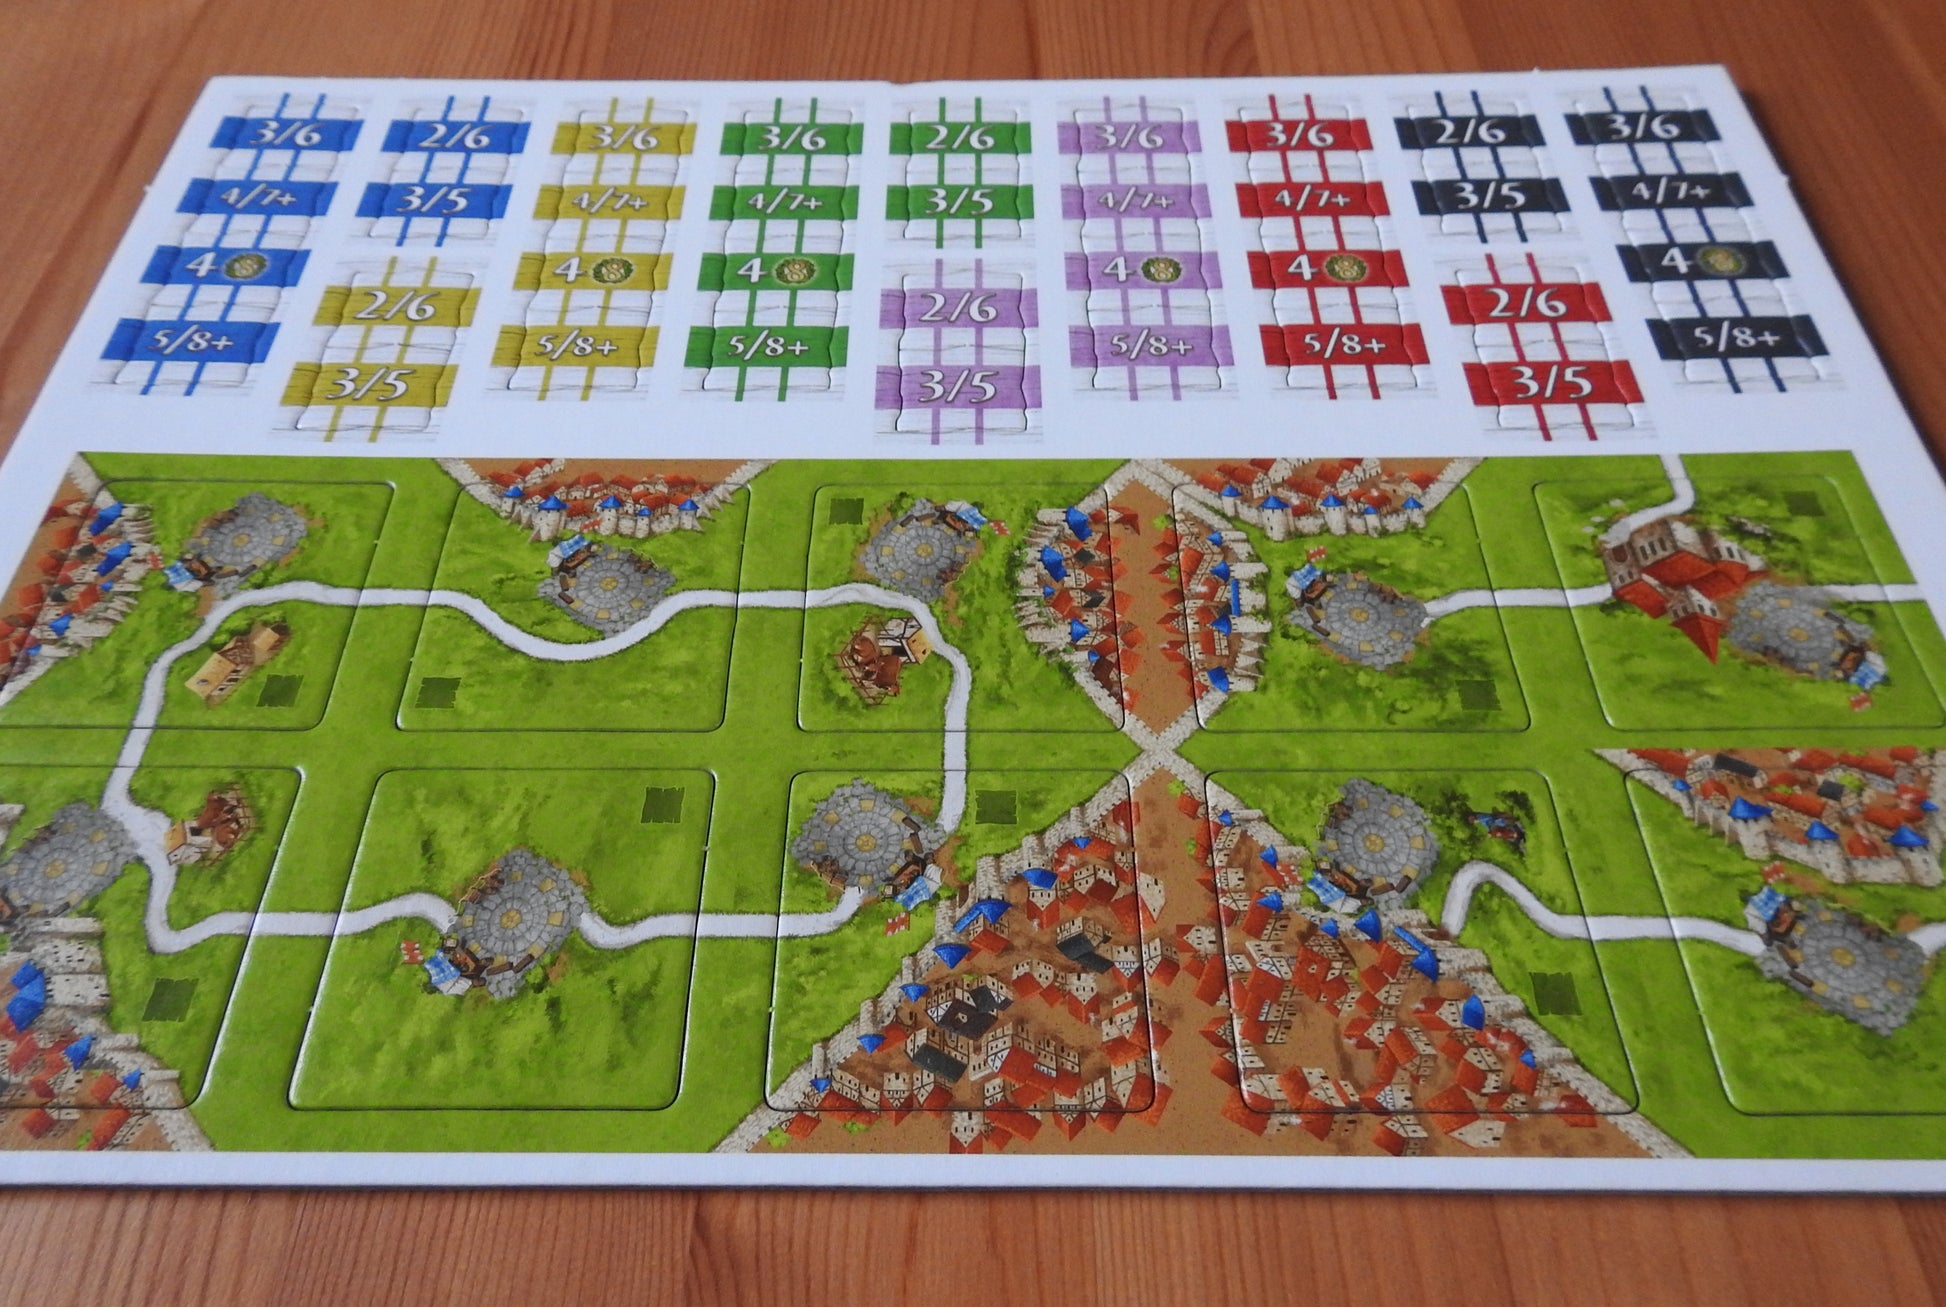 Another angle showing the entire Carcassonne Bets mini expansion.